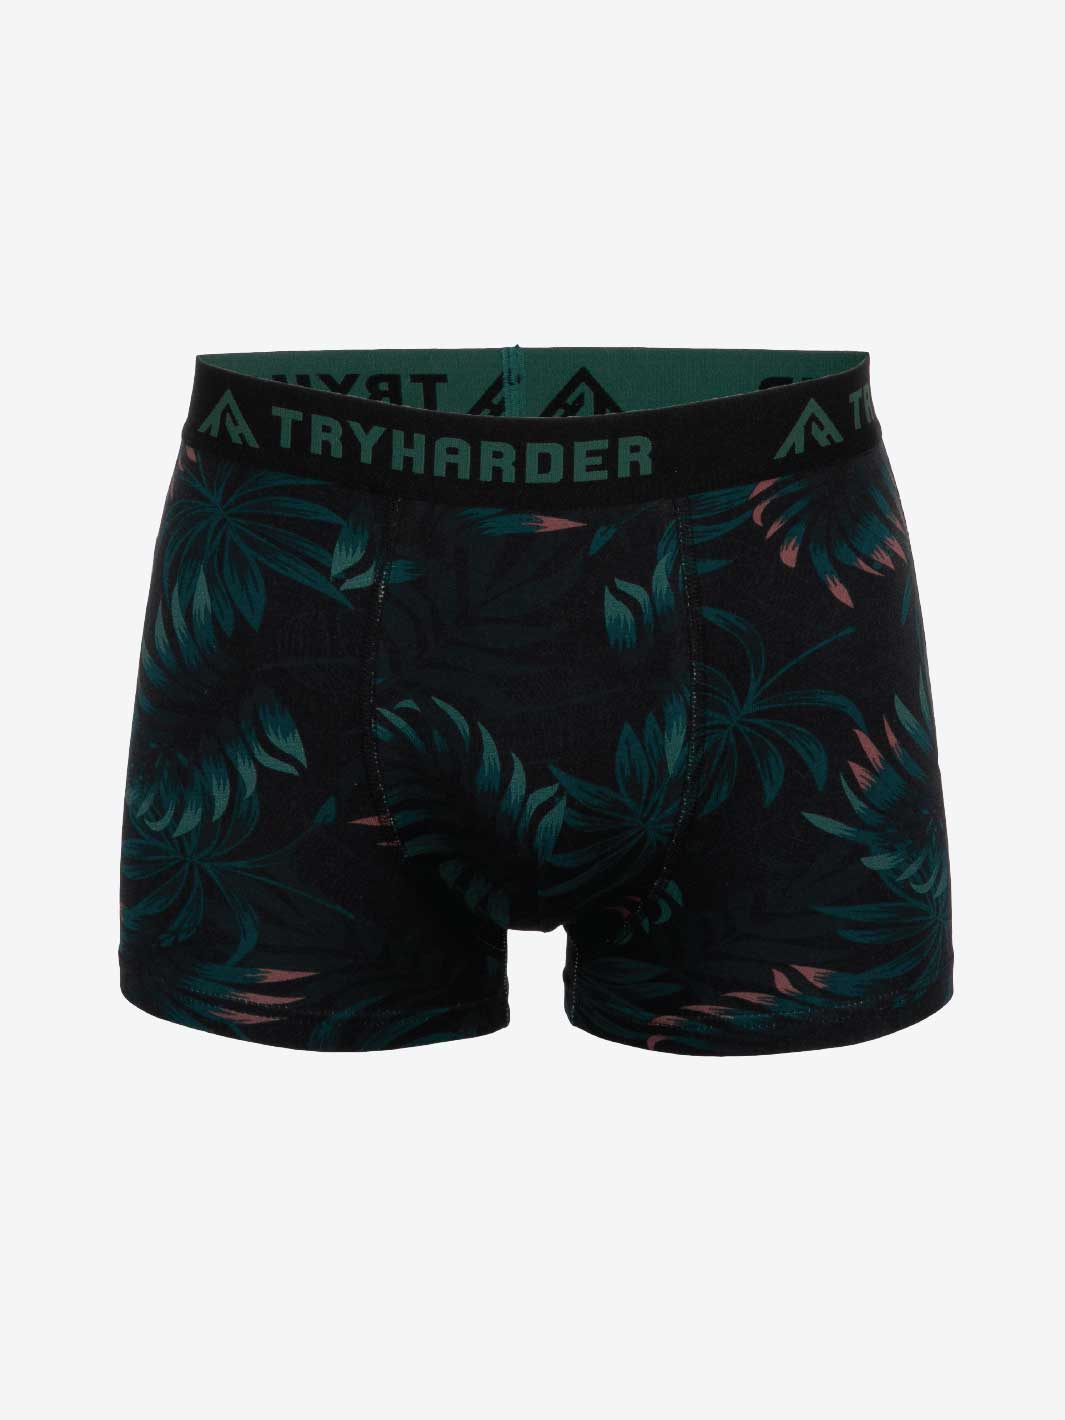 TRYHARDER - Boxer - Leaves 1 Pack